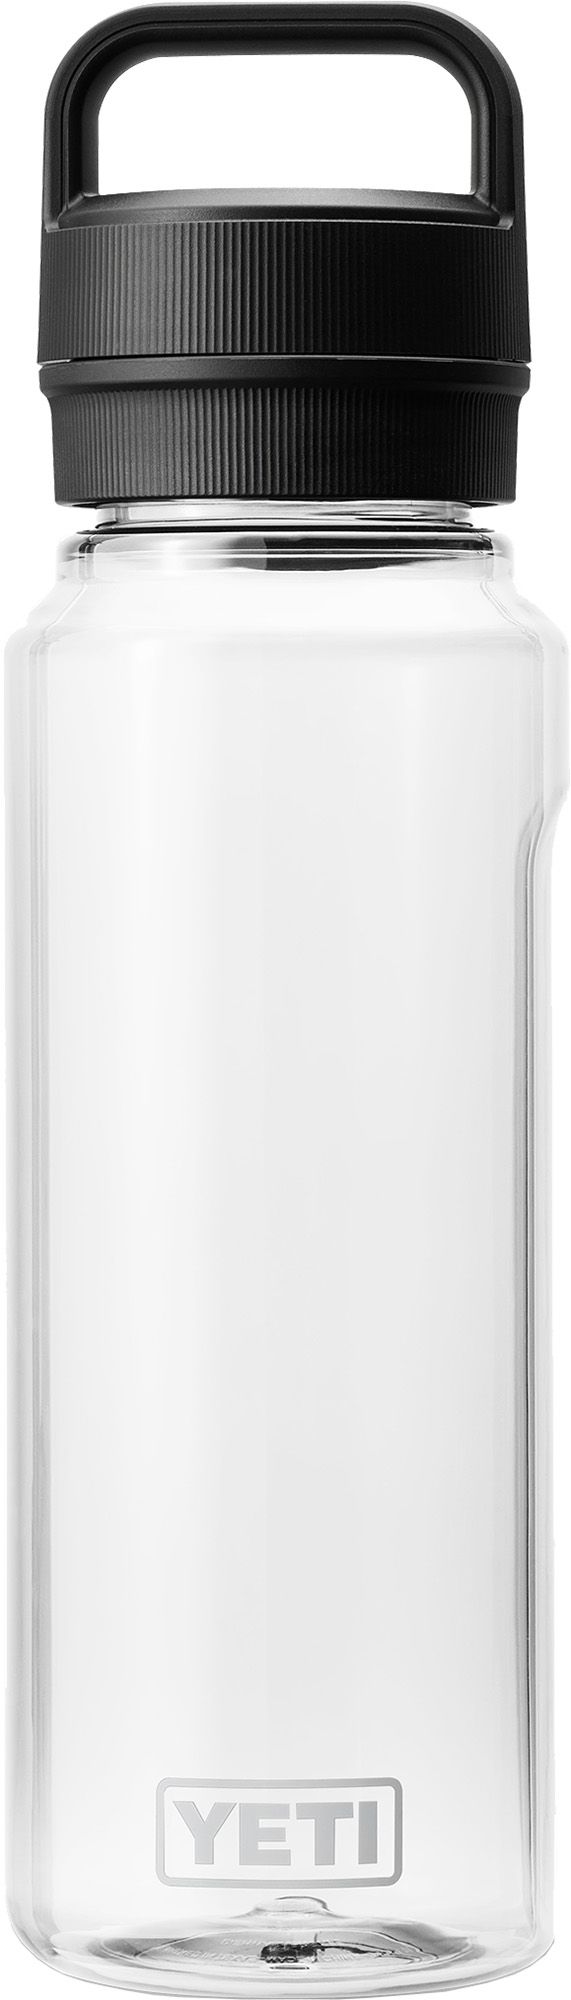 Photos - Other Accessories Yeti Yonder 1L / 34 oz. Water Bottle, Clear 23YETUYT1LYNDRBTTHYD 